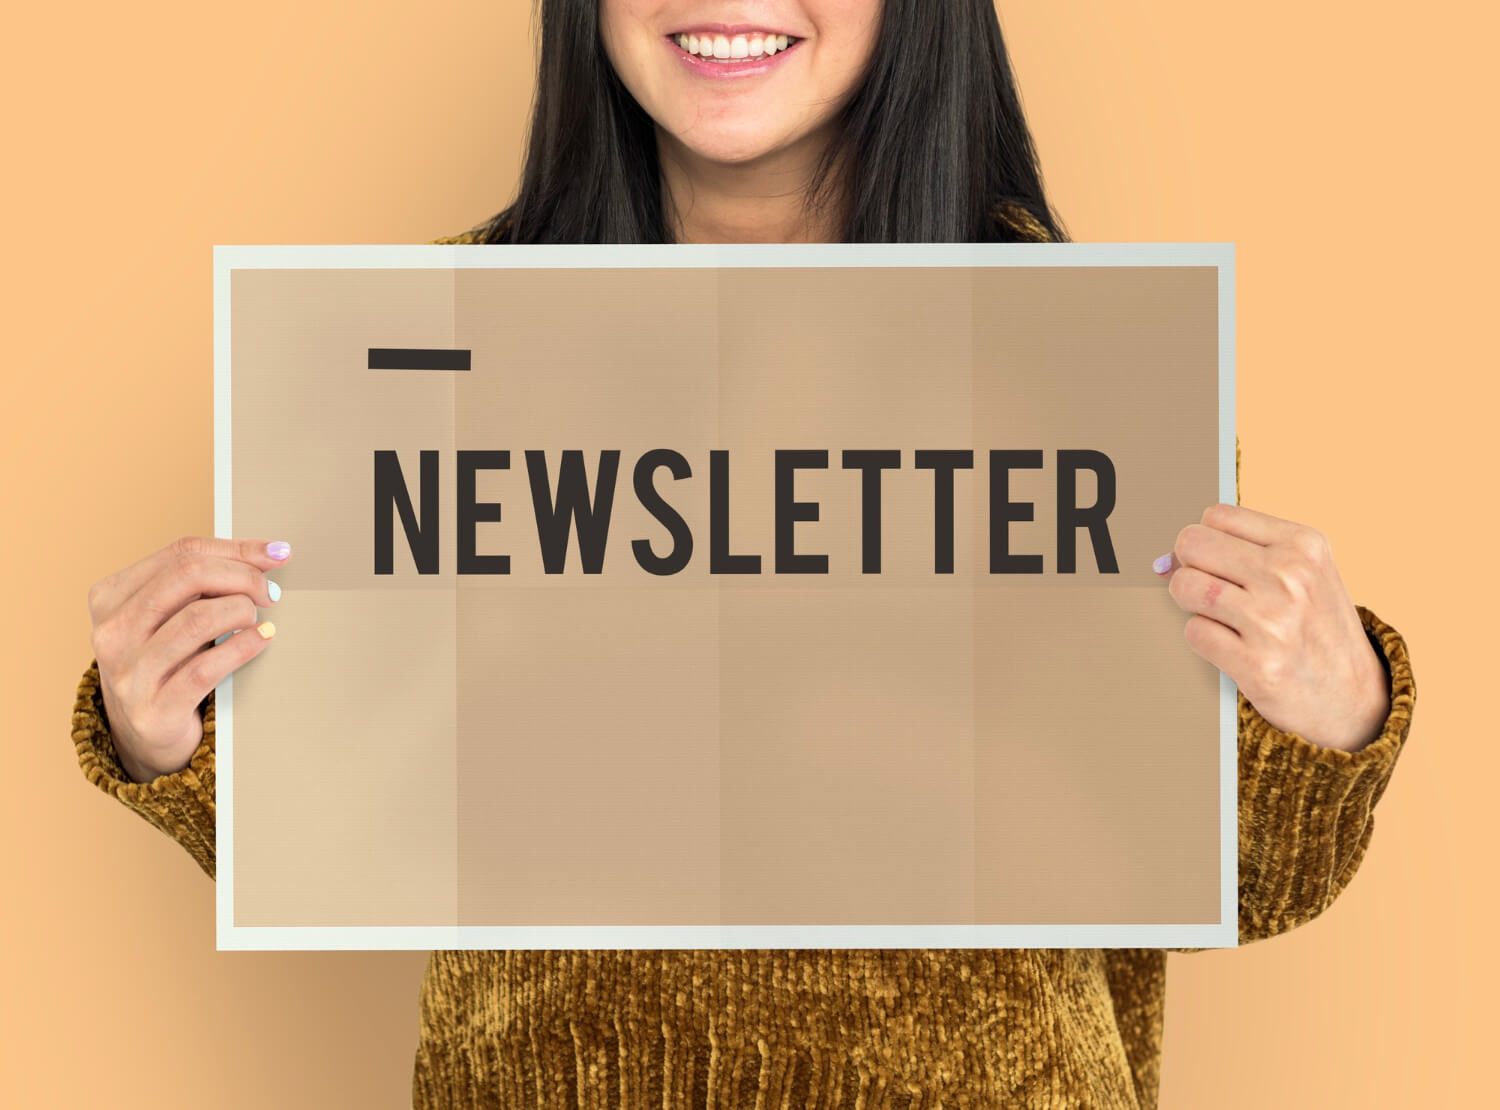 a smiling lady holding a newsletter sign